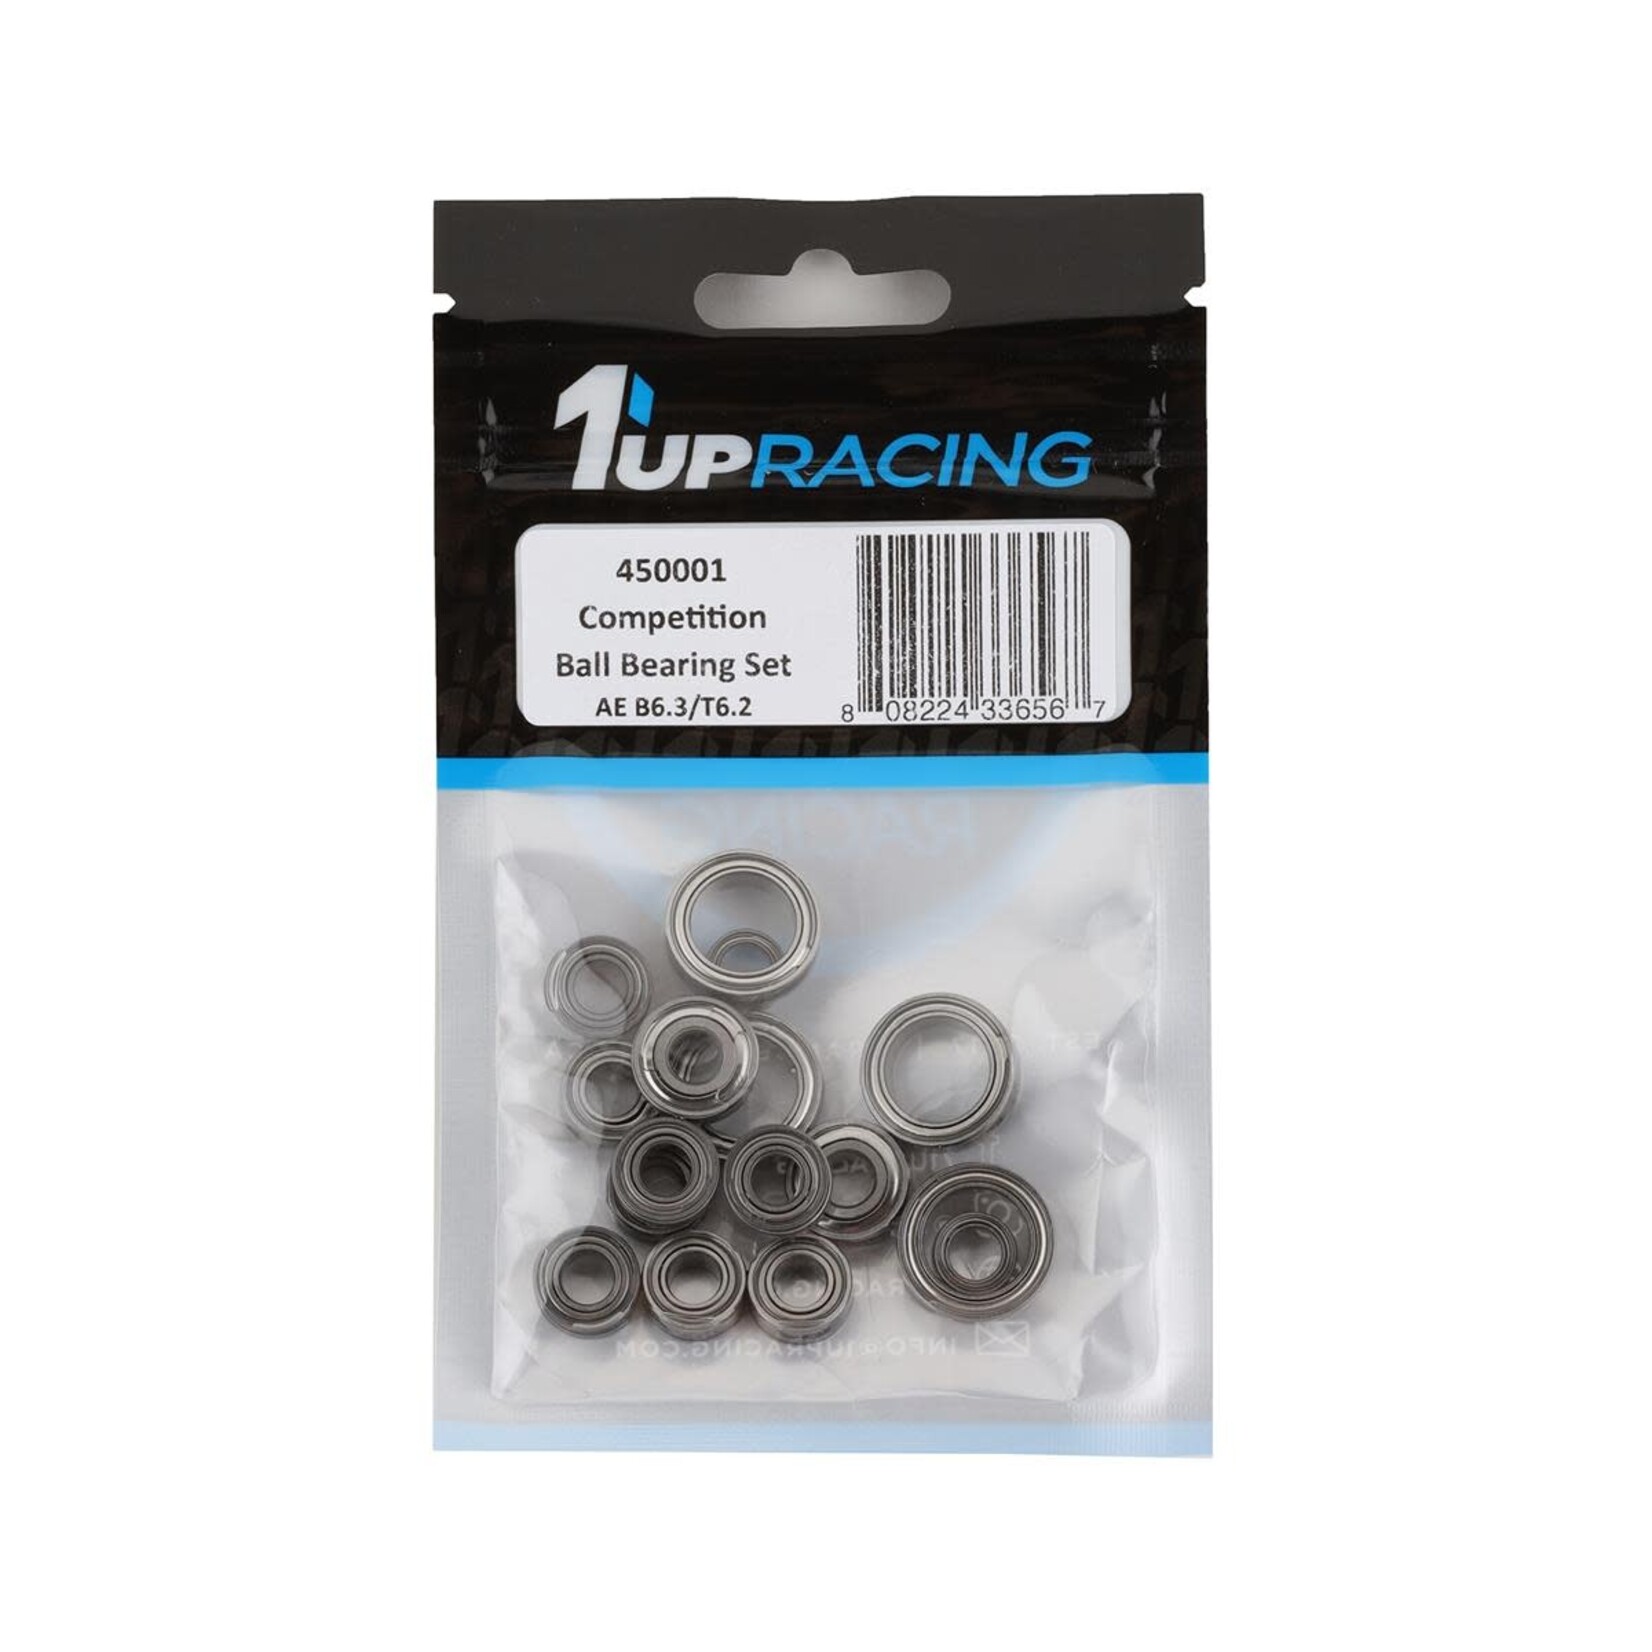 1UpRacing RC10B6.3/T6.2 Competition Ball Bearing Set